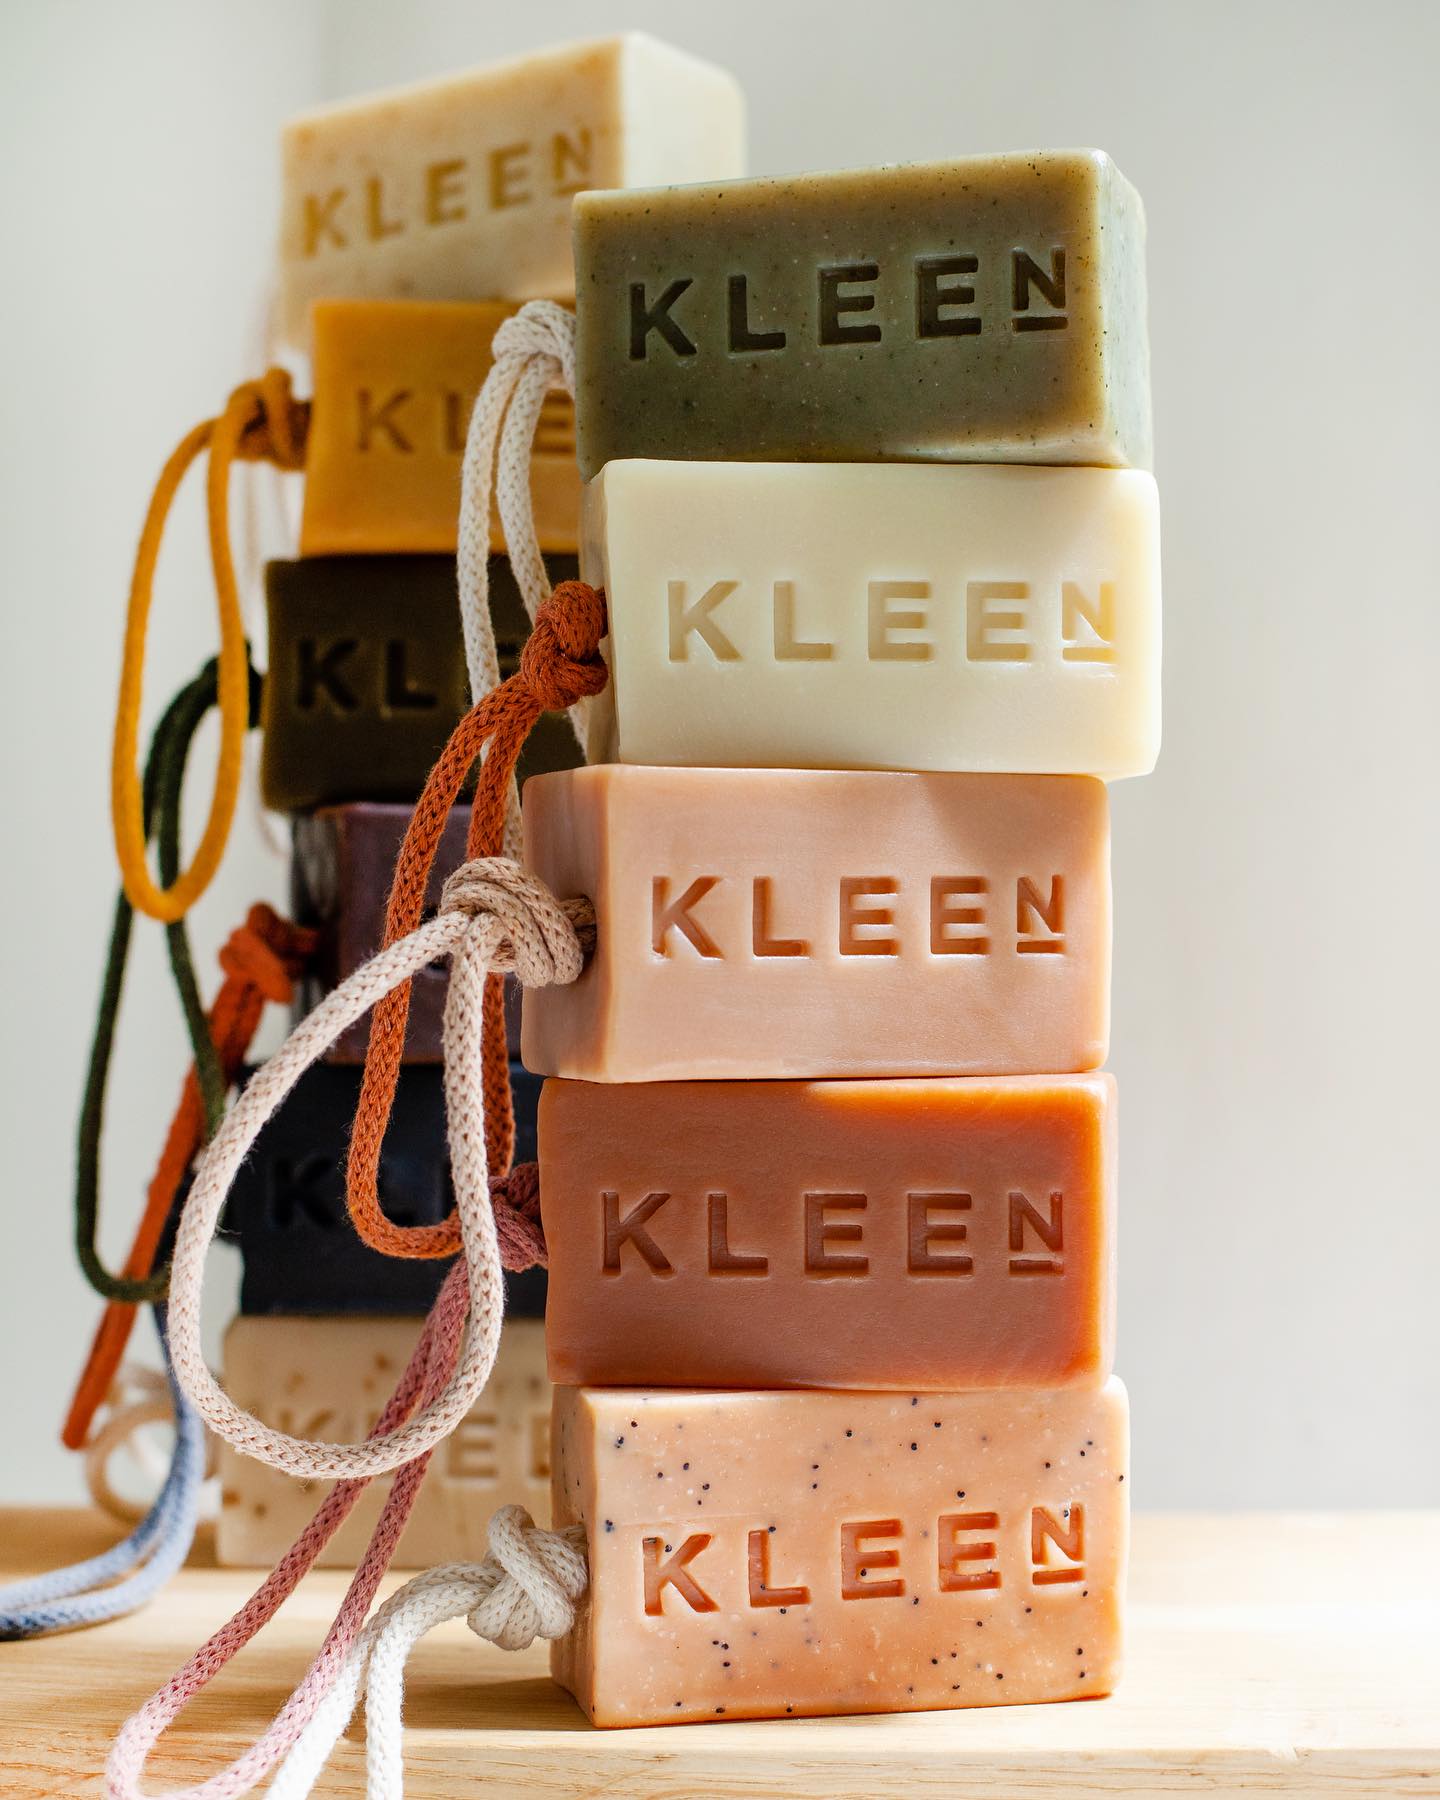 Kleensoaps |  Natural, Vegan Soap on a Rope made in the UK